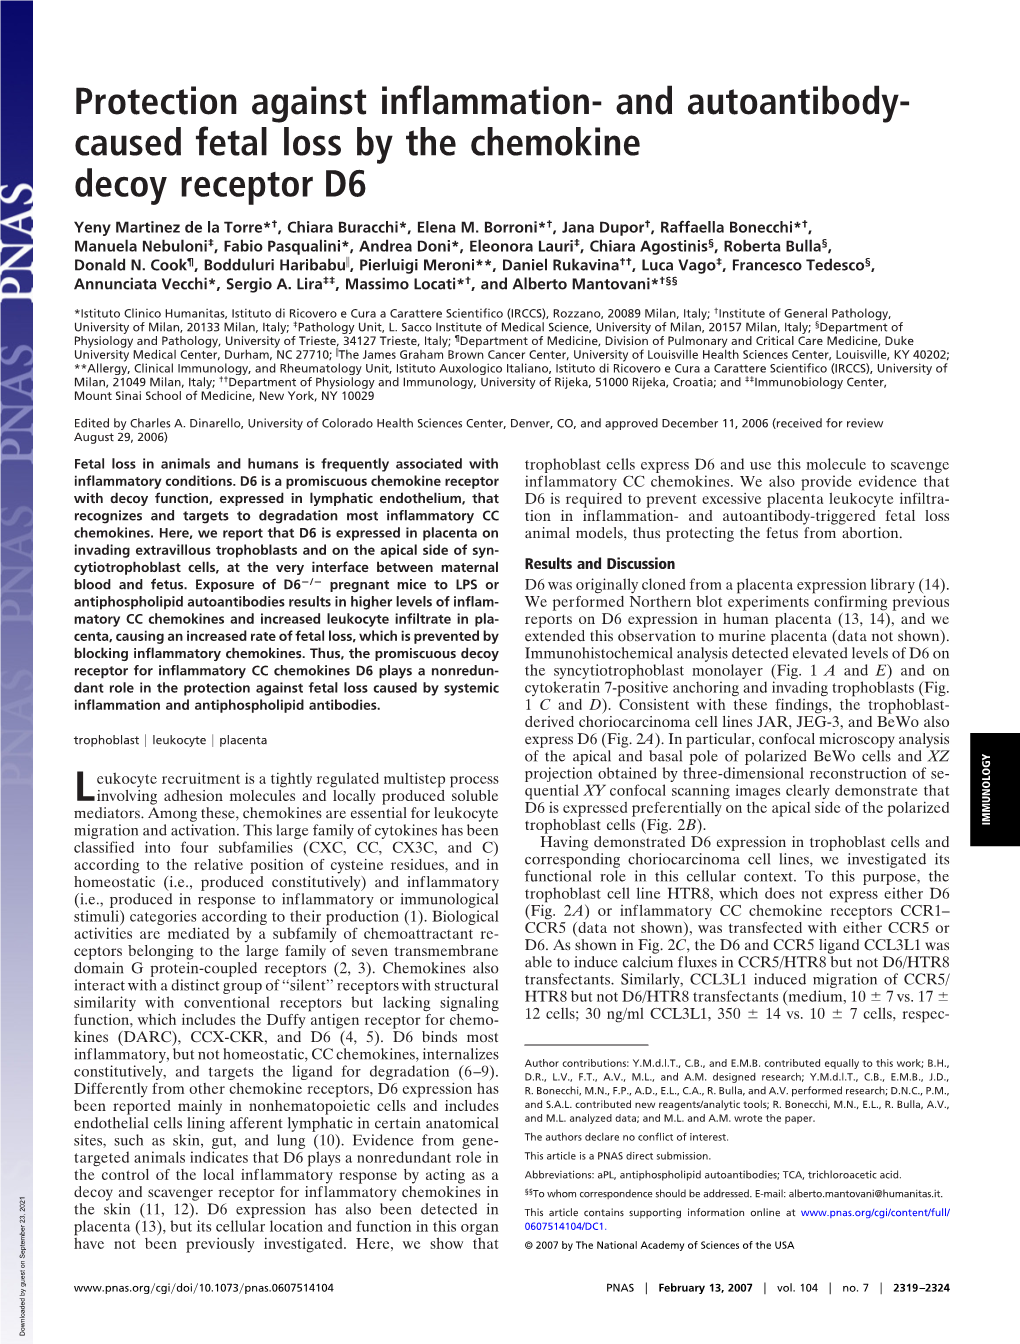 Caused Fetal Loss by the Chemokine Decoy Receptor D6